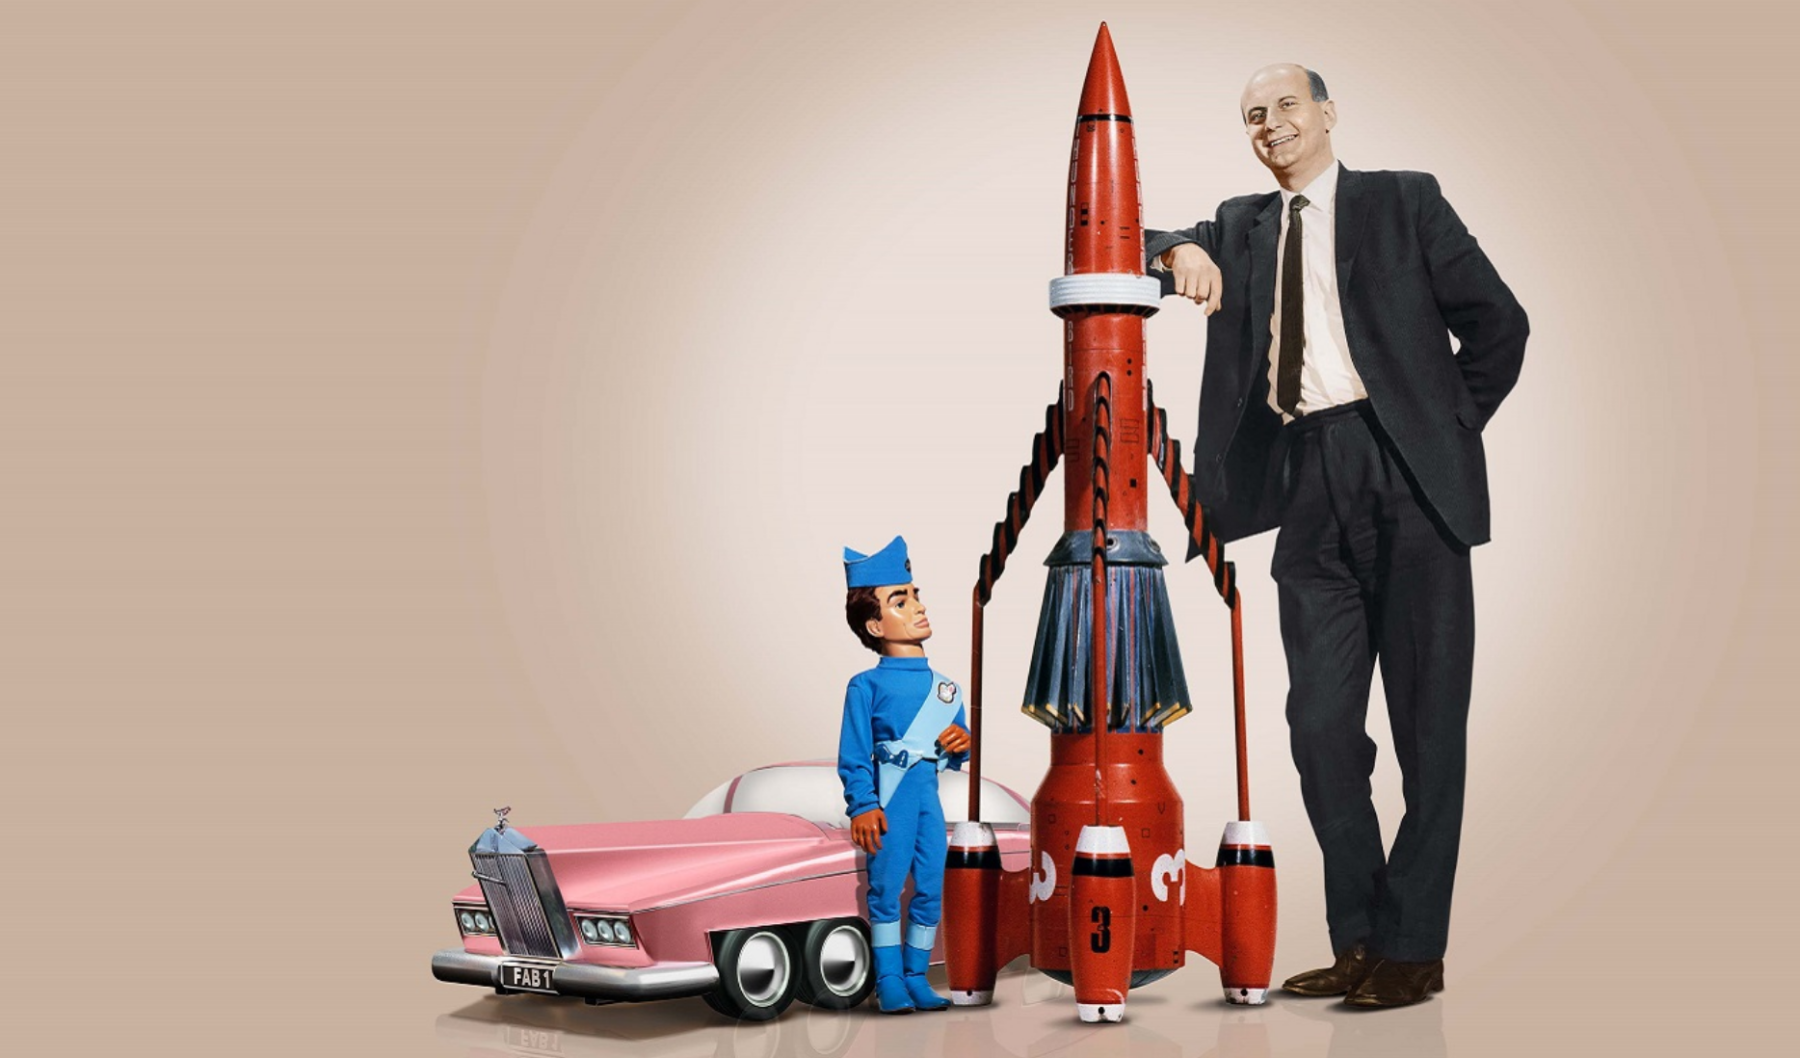 Gerry Anderson leans on a large model of Thunderbird 3 observed by one of his puppet creations Scott Tracy